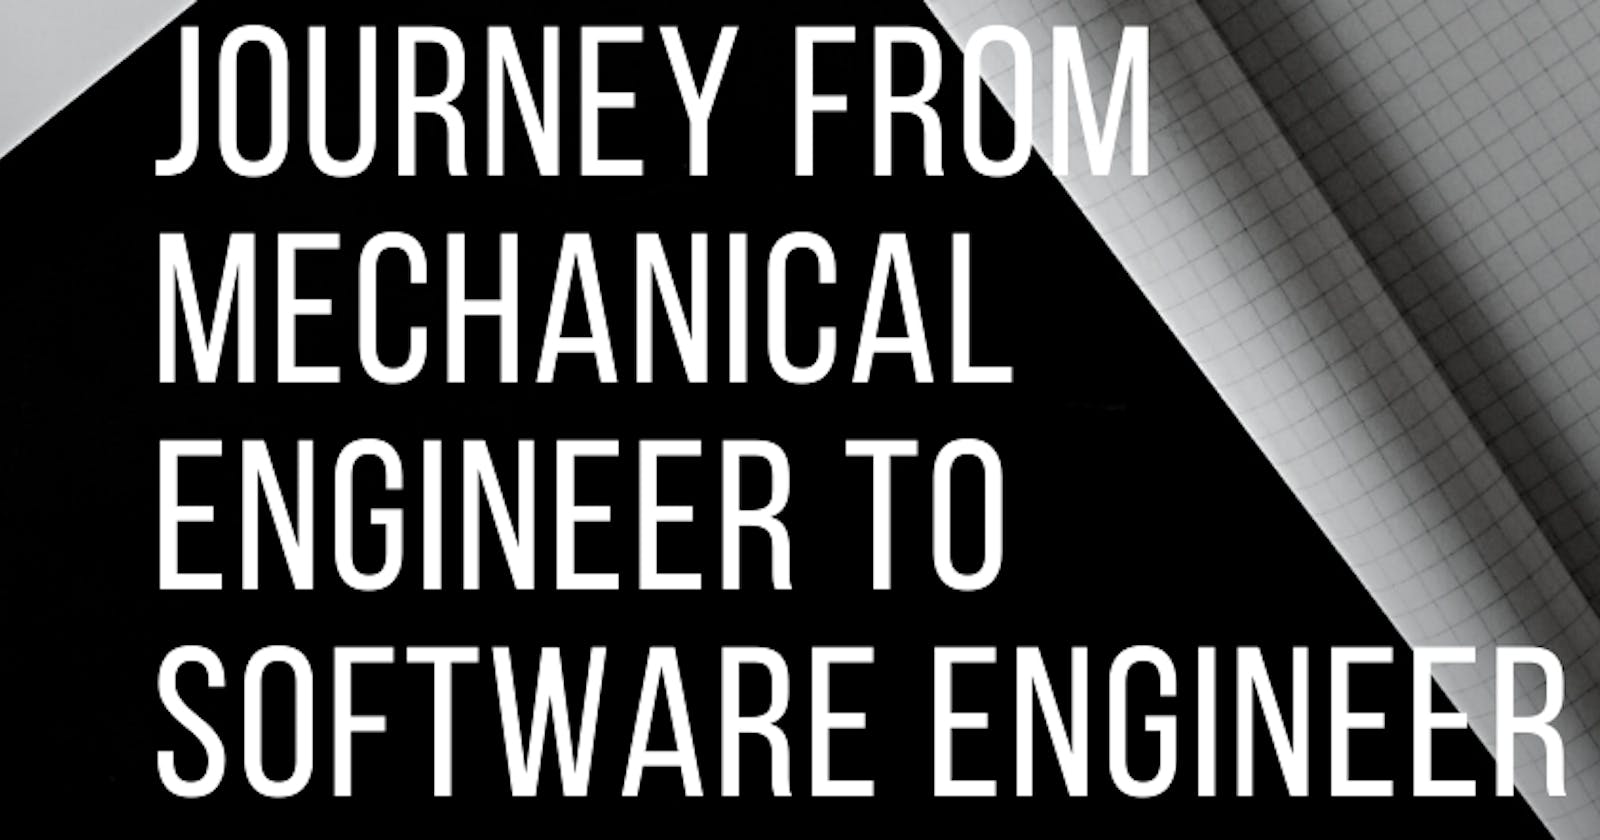 A Journey from Mechanical Engineer to Software Engineer